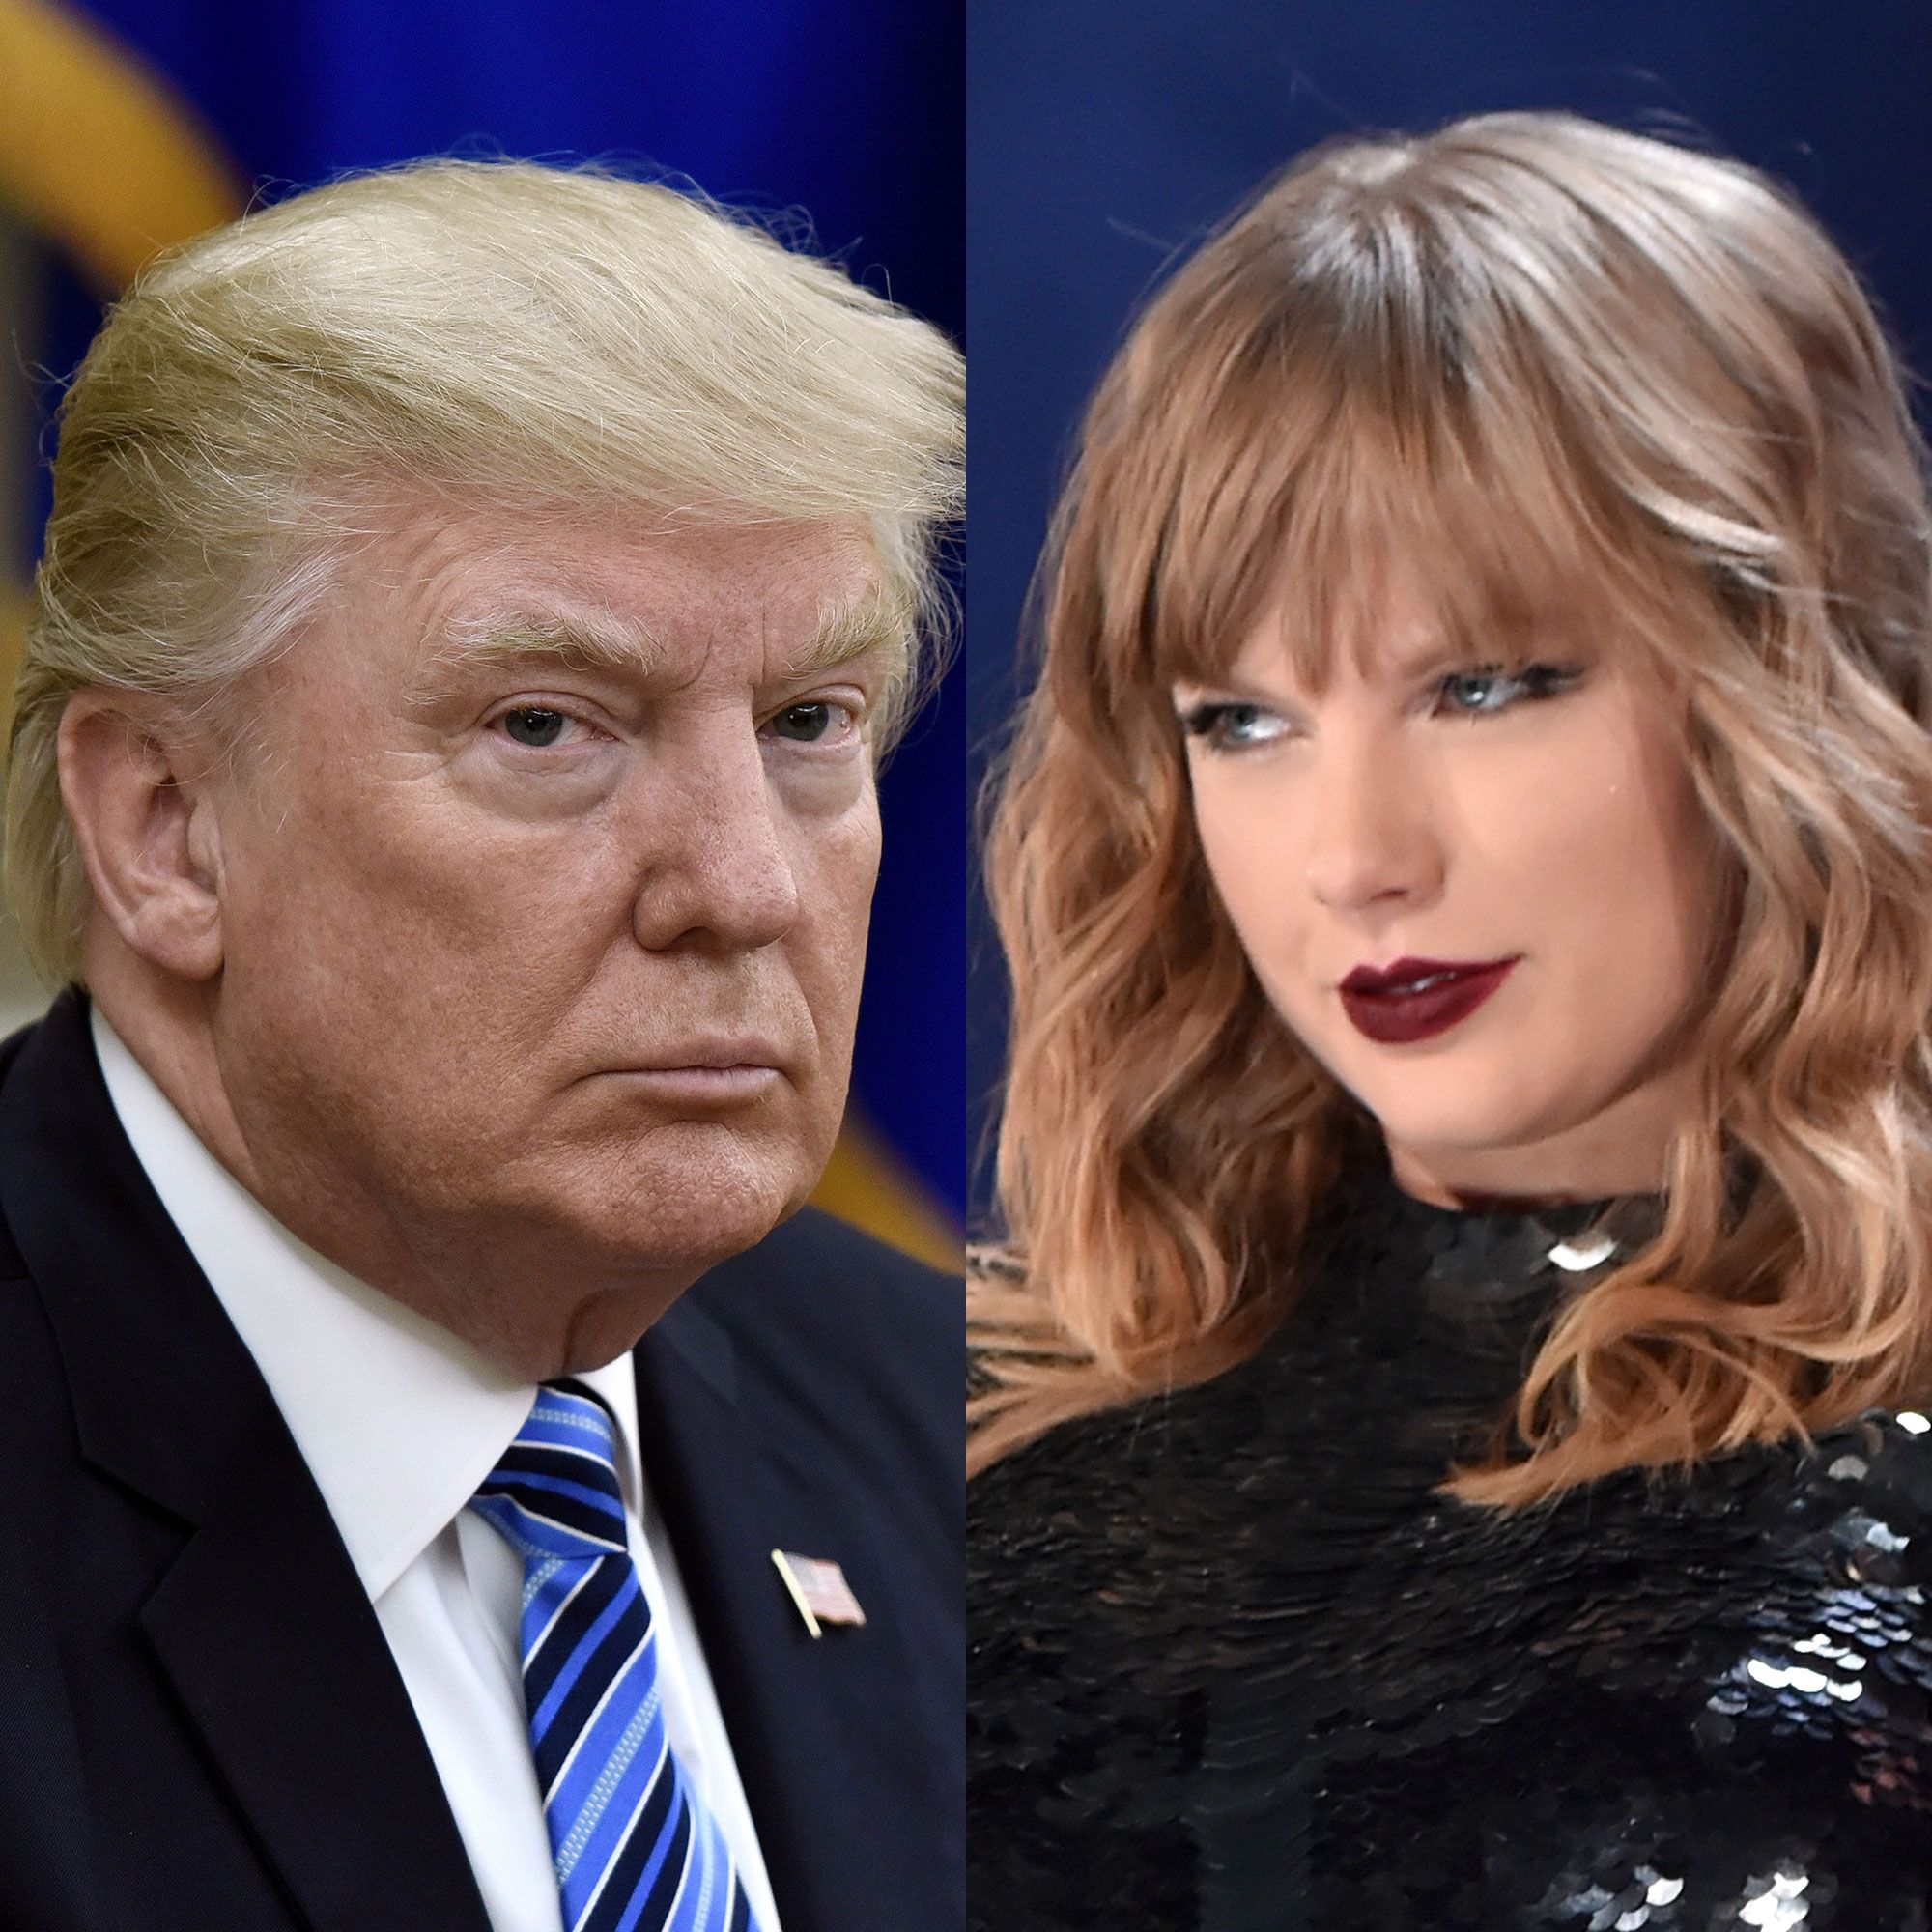 Donald Trump Responds to Taylor Swift's Democratic Endorsement With Patronizing Remark